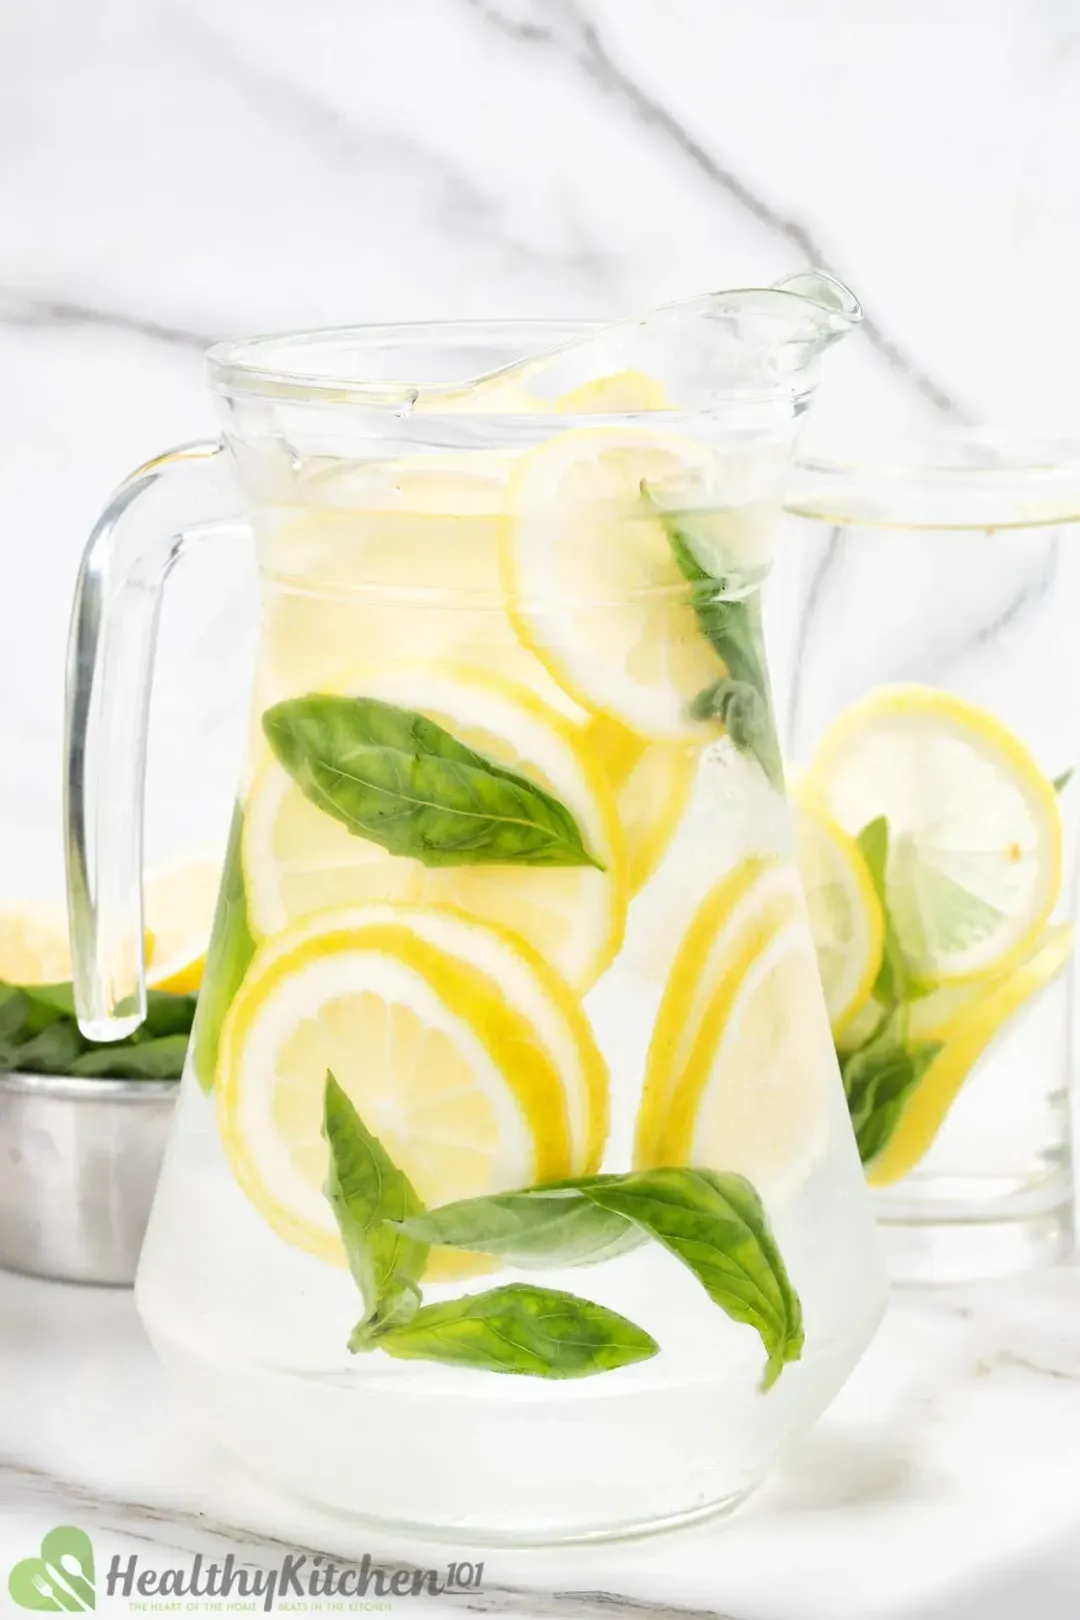 A pitcher of cold water submerging lots of lemon wheels and basil leaves floating about